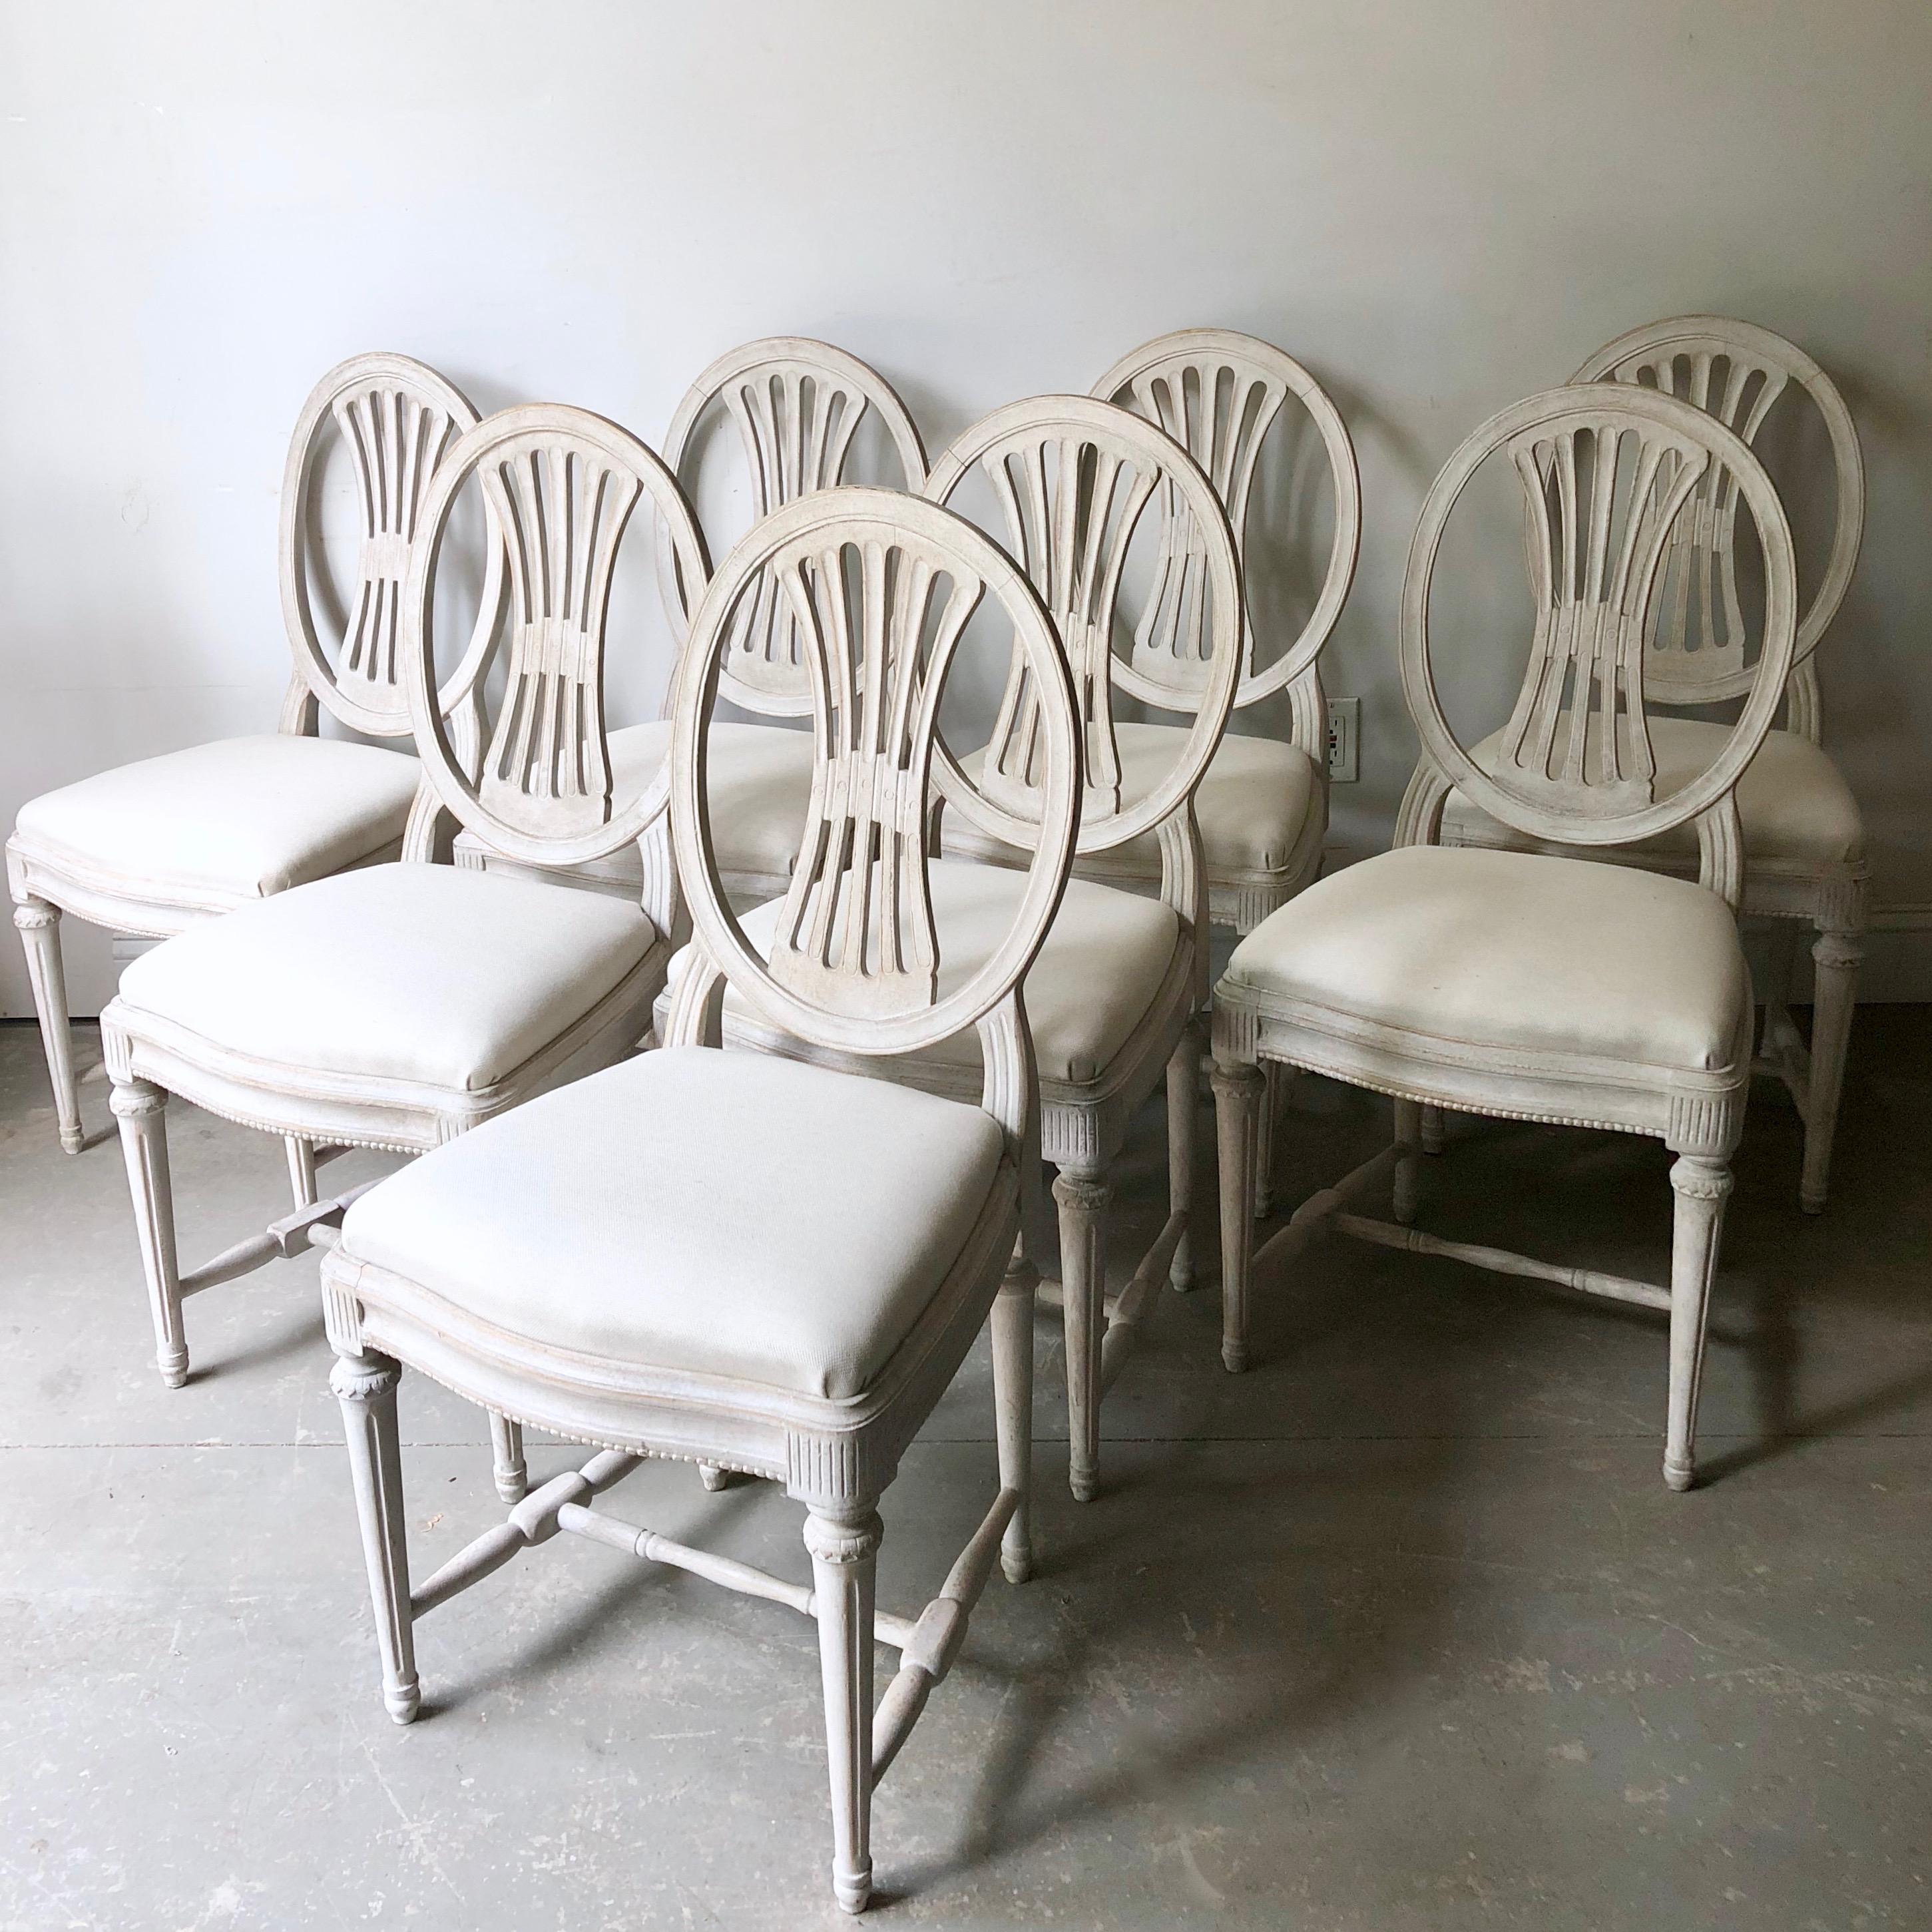 A set of eight Swedish Gustavian style painted dining chairs with pierced slats and carved weatsheaf details. Loose seats covered in light color pure linen.
Sweden, circa 1900
Here are few examples, surprising pieces and objects, authentic,